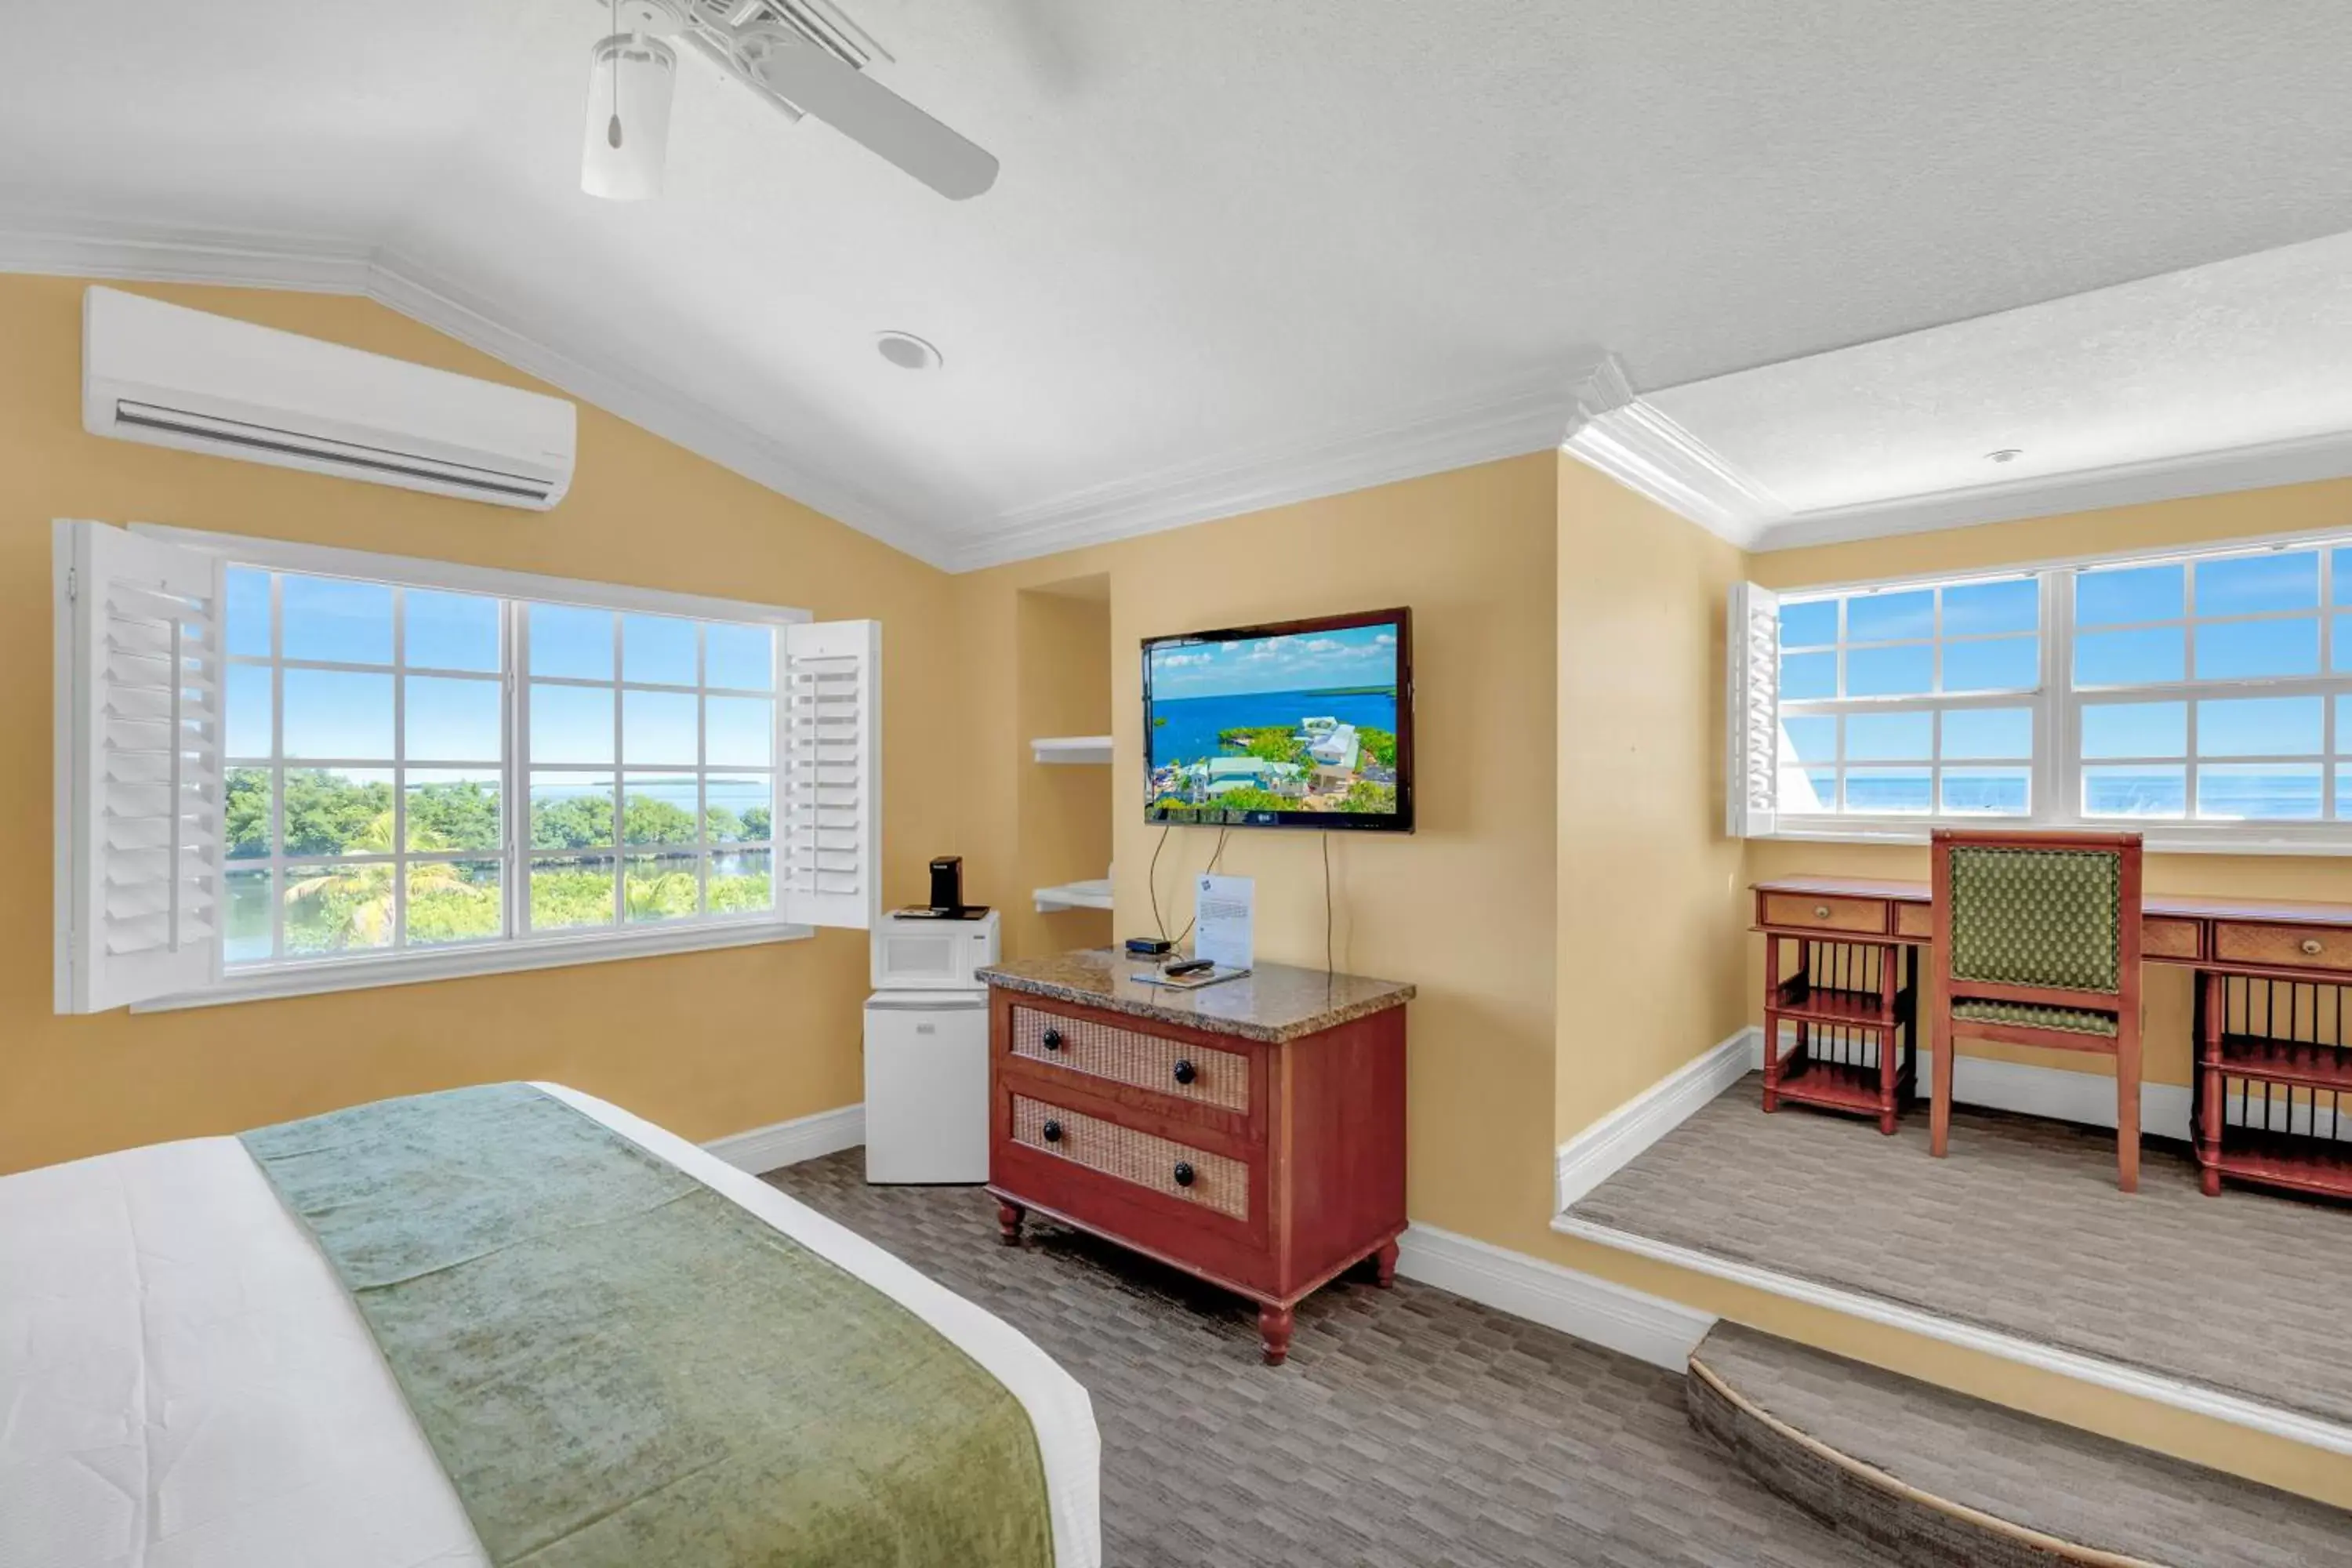 Deluxe King Room with Ocean View - Non-Smoking in Dove Creek Resort & Marina, Trademark Collection by Wyndham